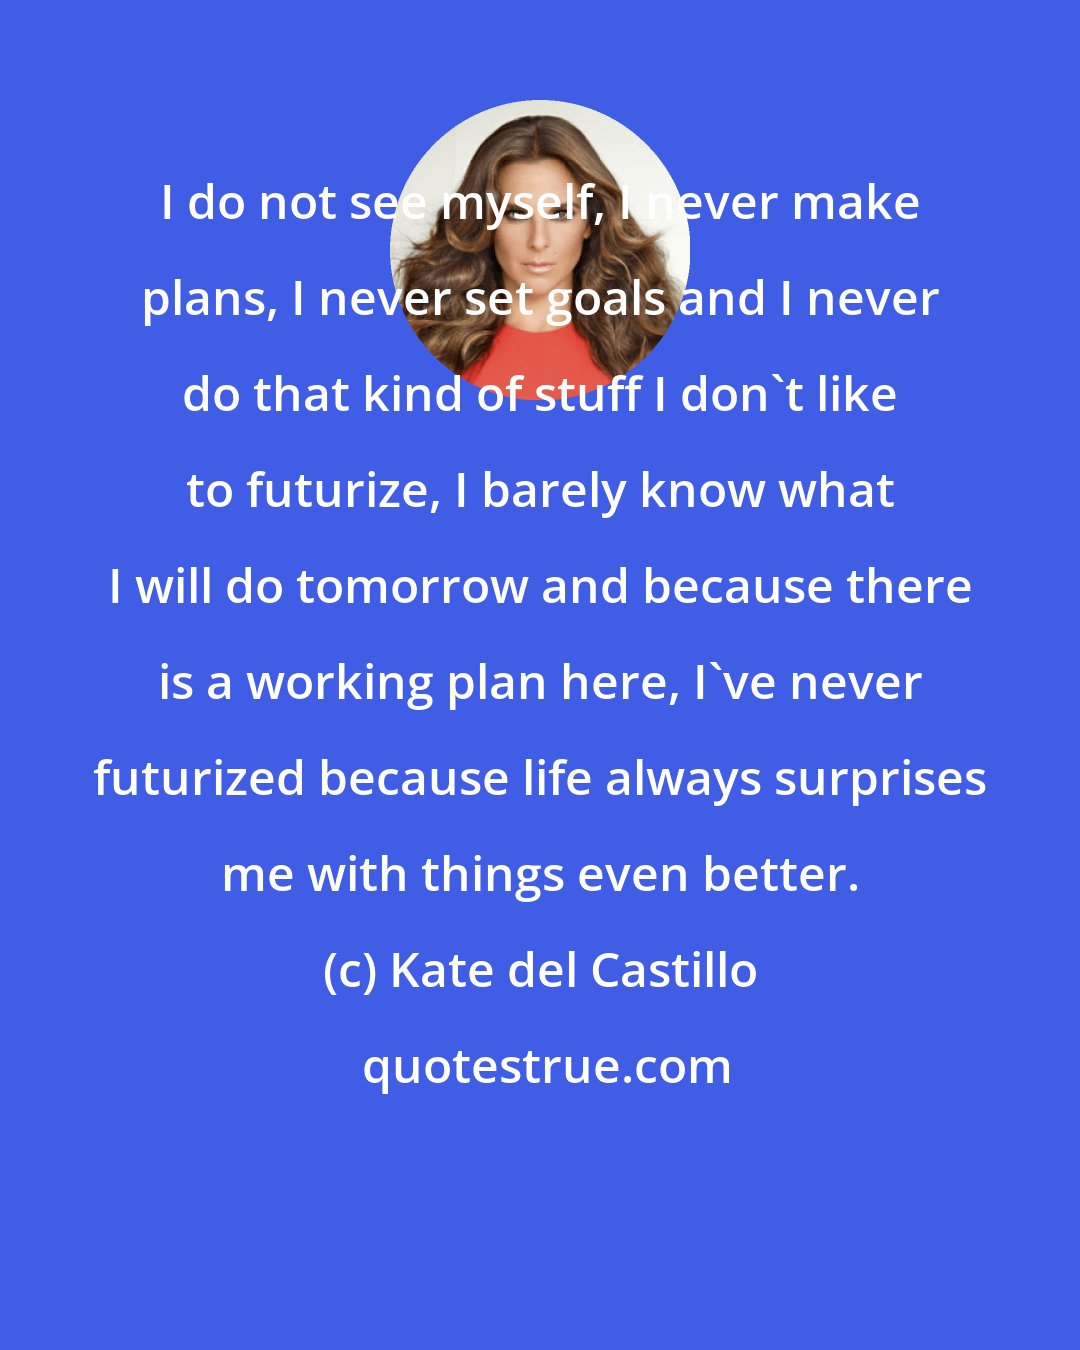 Kate del Castillo: I do not see myself, I never make plans, I never set goals and I never do that kind of stuff I don't like to futurize, I barely know what I will do tomorrow and because there is a working plan here, I've never futurized because life always surprises me with things even better.